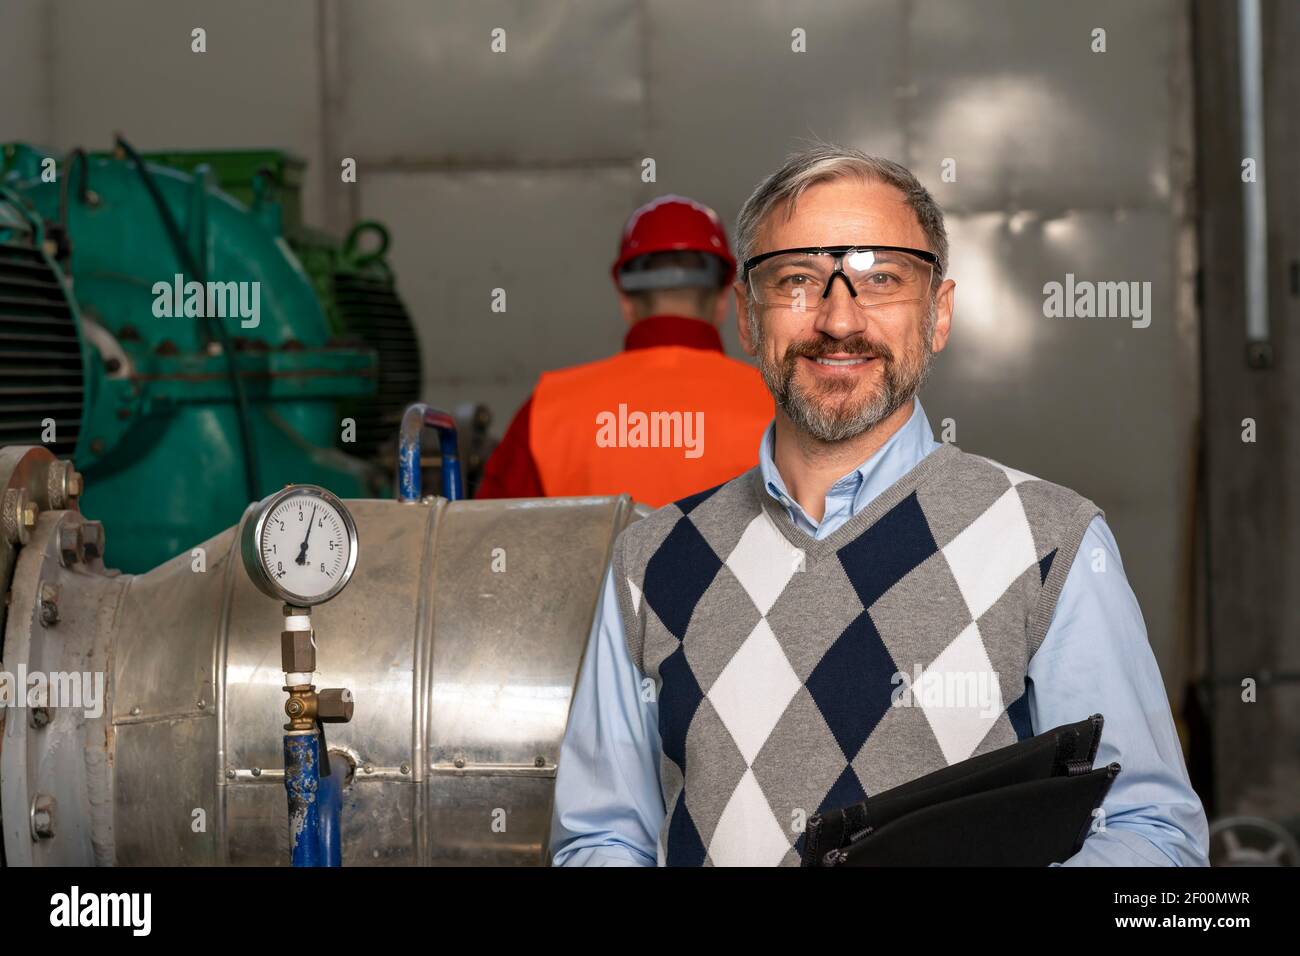 Smiling Manager With Digital Tablet Looking at Camera. Engineer Standing in District Heating Power Plant. Digital Technology Concept. Industry 4.0 Stock Photo